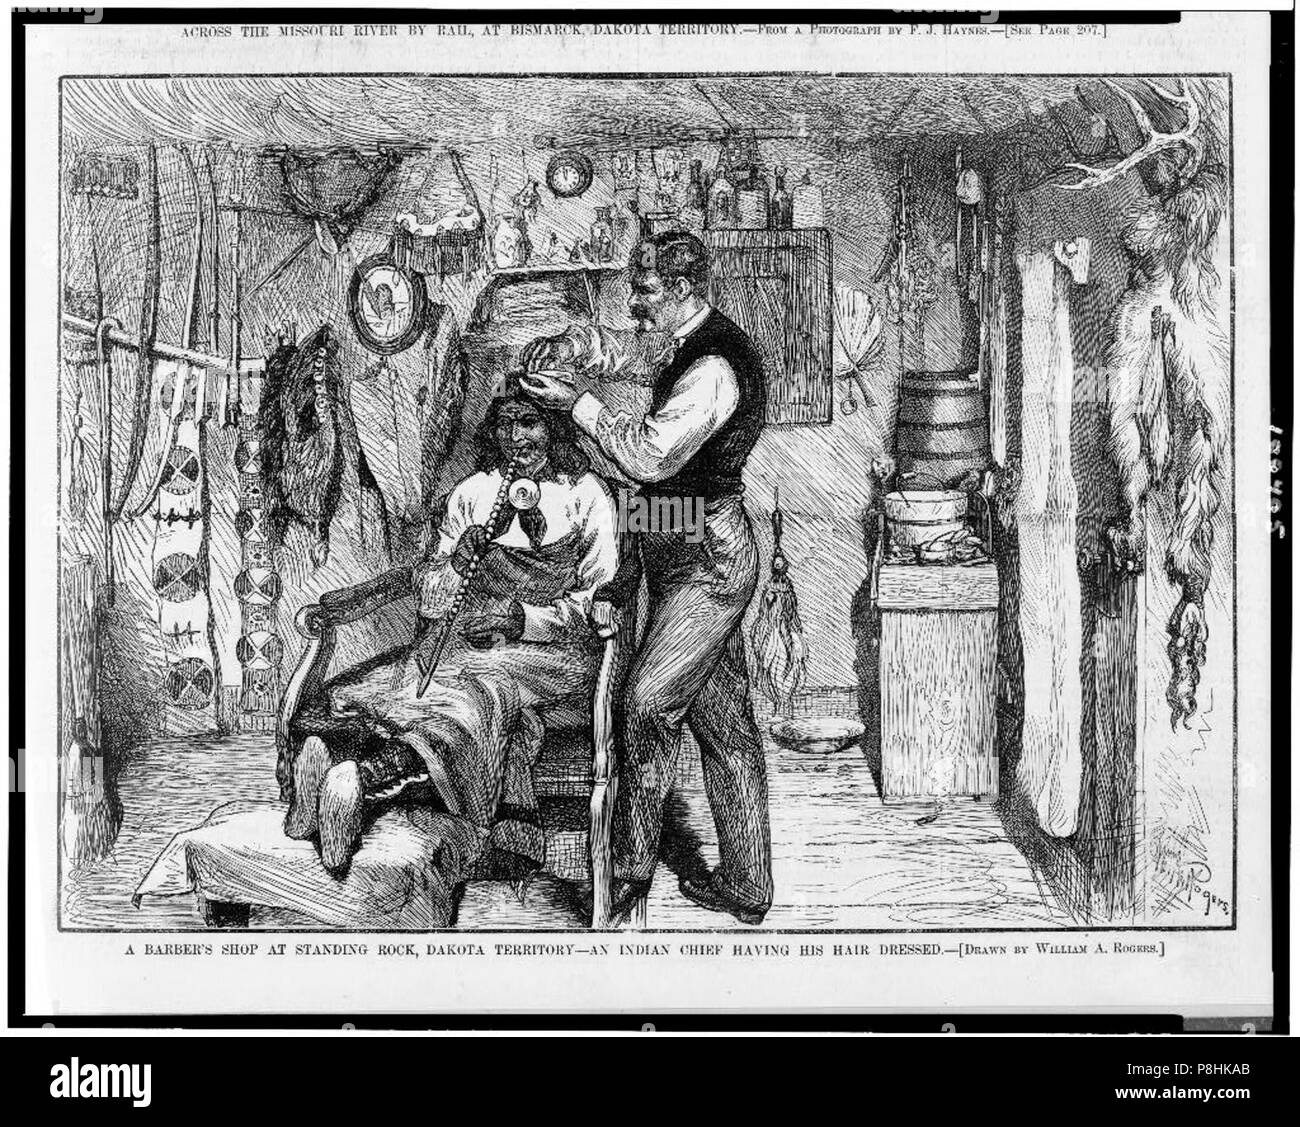 A barber's shop at Standing Rock, Dakota Territory-an Indian chief having his hair dressed - drawn by William A. Rogers. Stock Photo